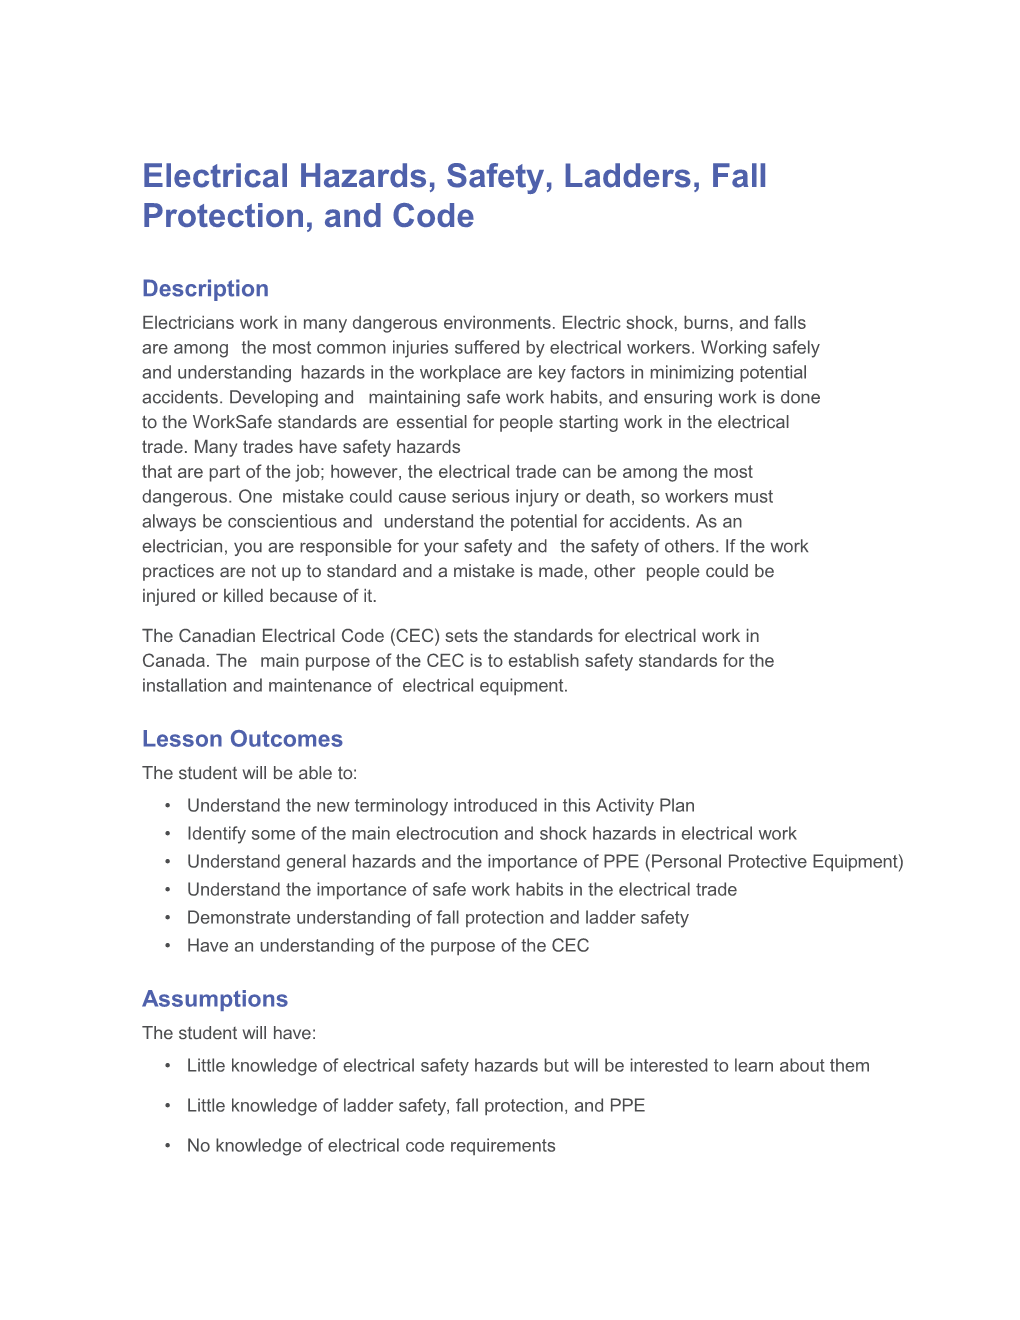 Electricalhazards, Safety,Ladders,Fallprotection,Andcode